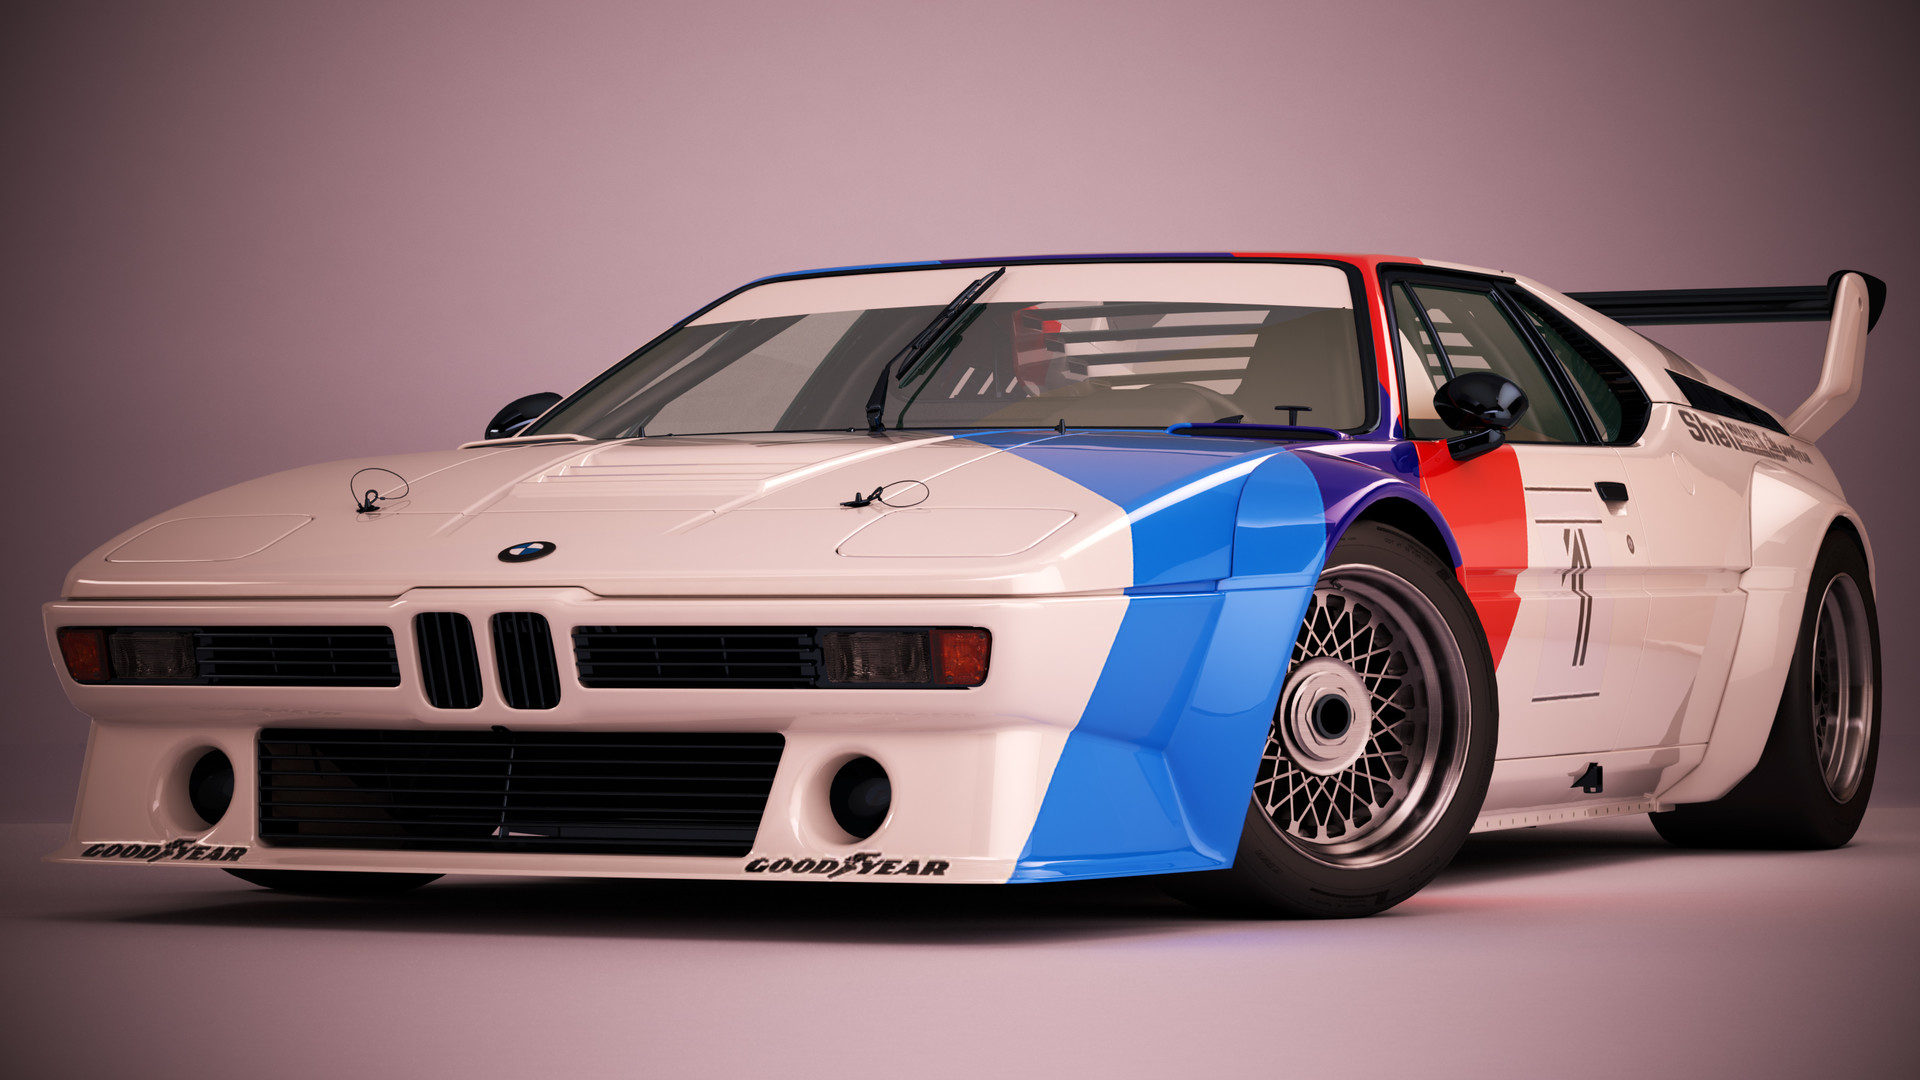 Auto A Brief History On The Legendary M1 Bmw